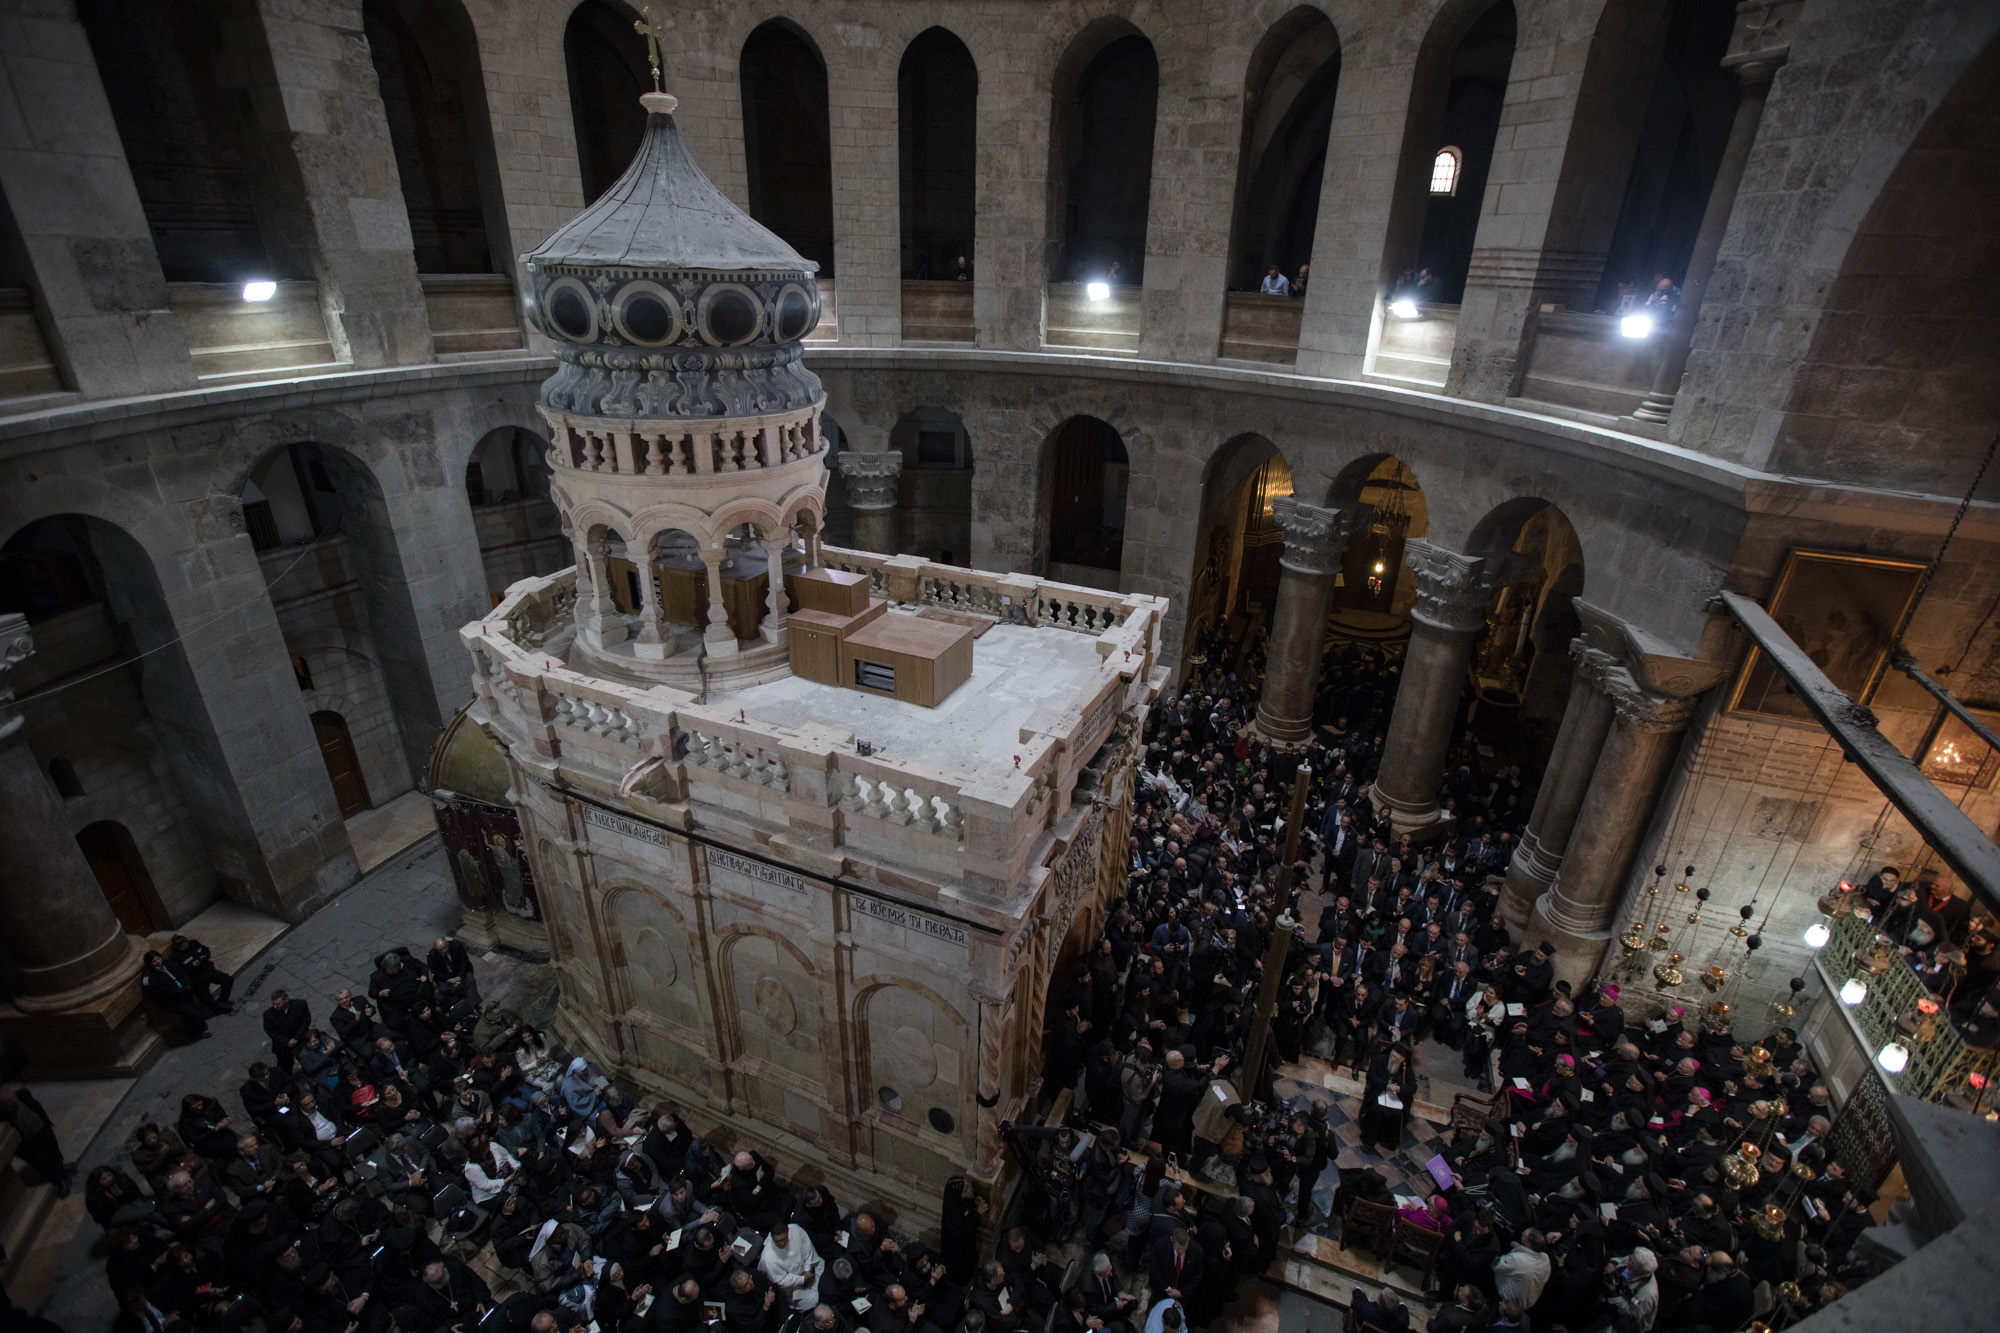 Dignitaries celebrate the renovation of the Edicule, which houses Jesus' tomb within the Church of the Holy Sepulchre.